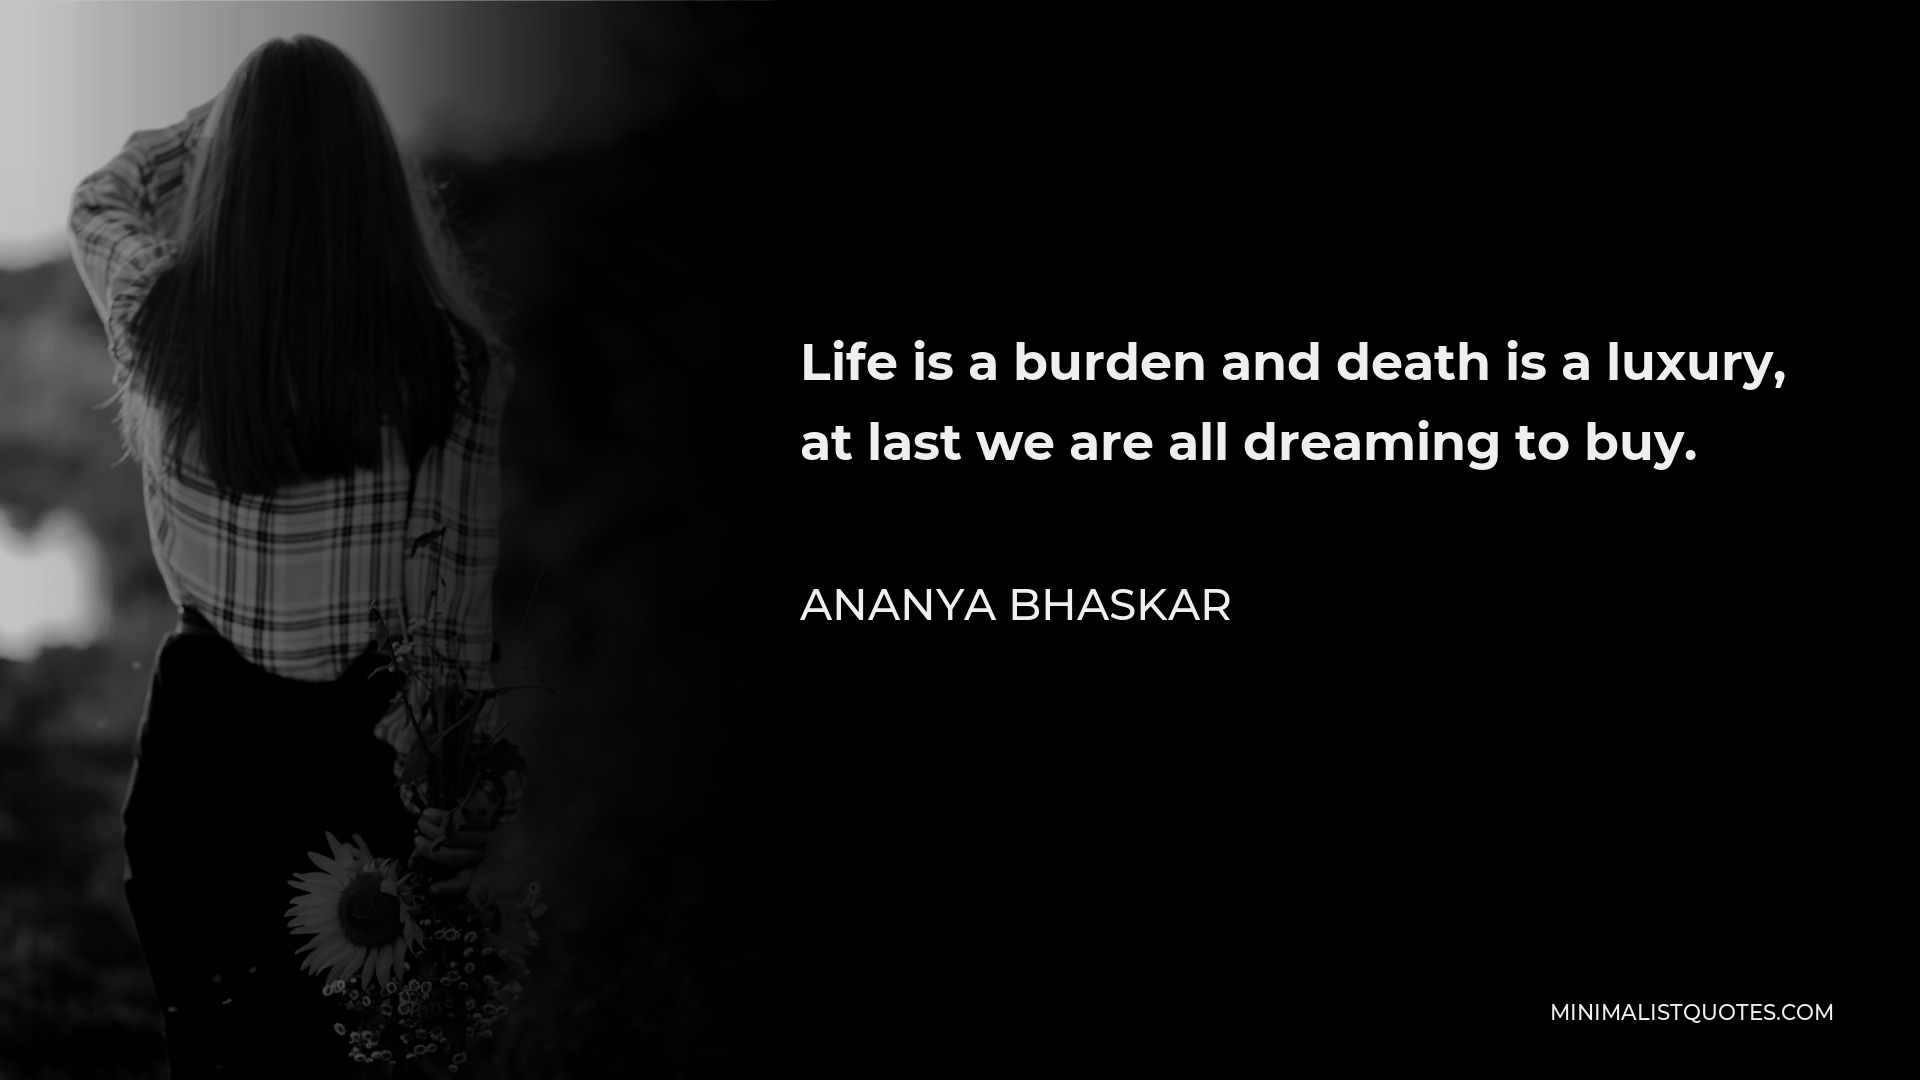 Ananya Bhaskar Quote - Life is a burden and death is a luxury, at last we are all dreaming to buy.